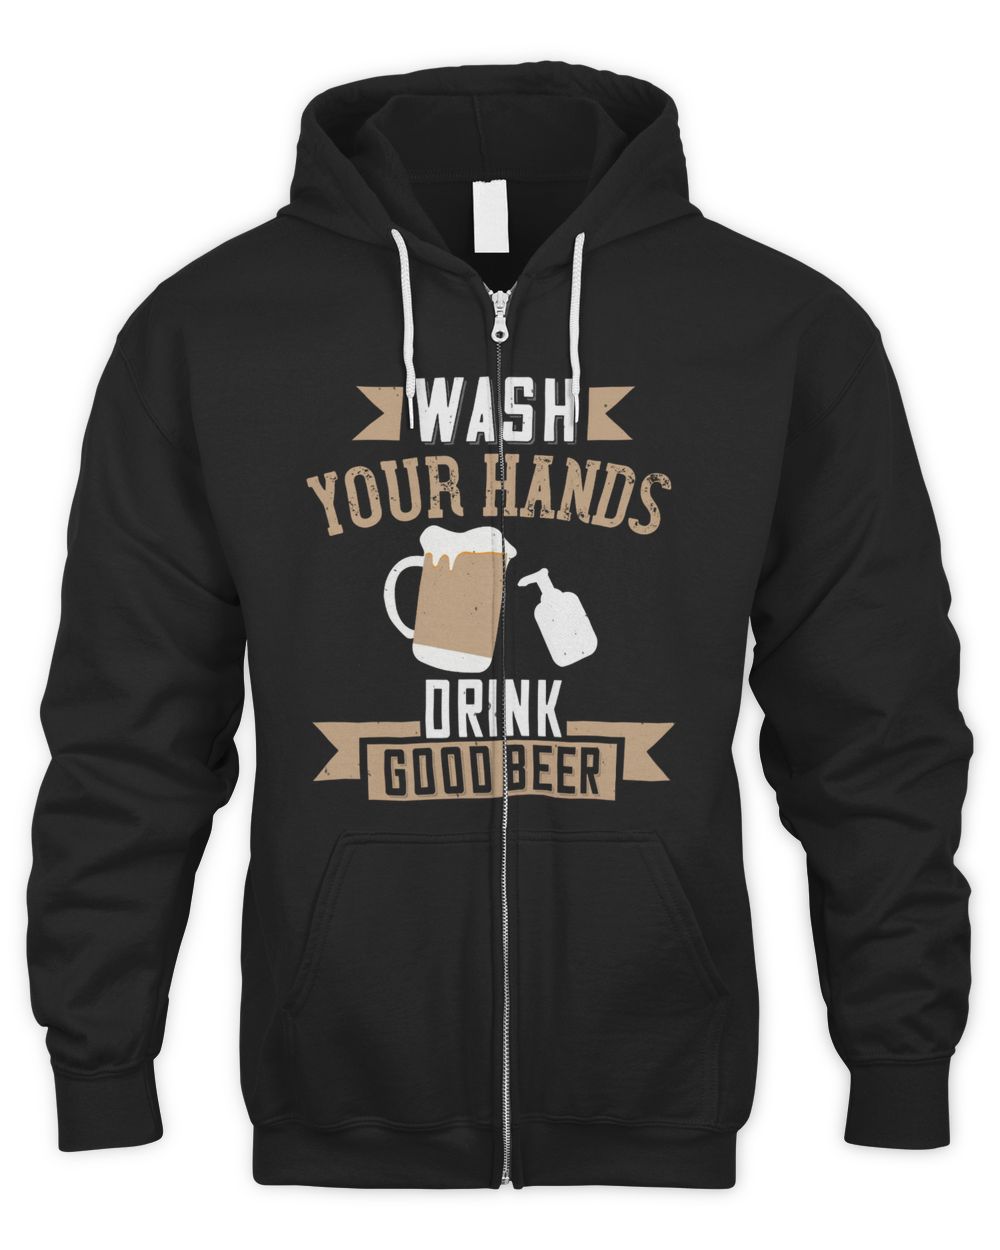 Wash Your Hands Drink Good Beer Beer Shirt For Beer Lover With Free Shipping, Great Gift For Fathers Day Men's Zip Hoodie black 